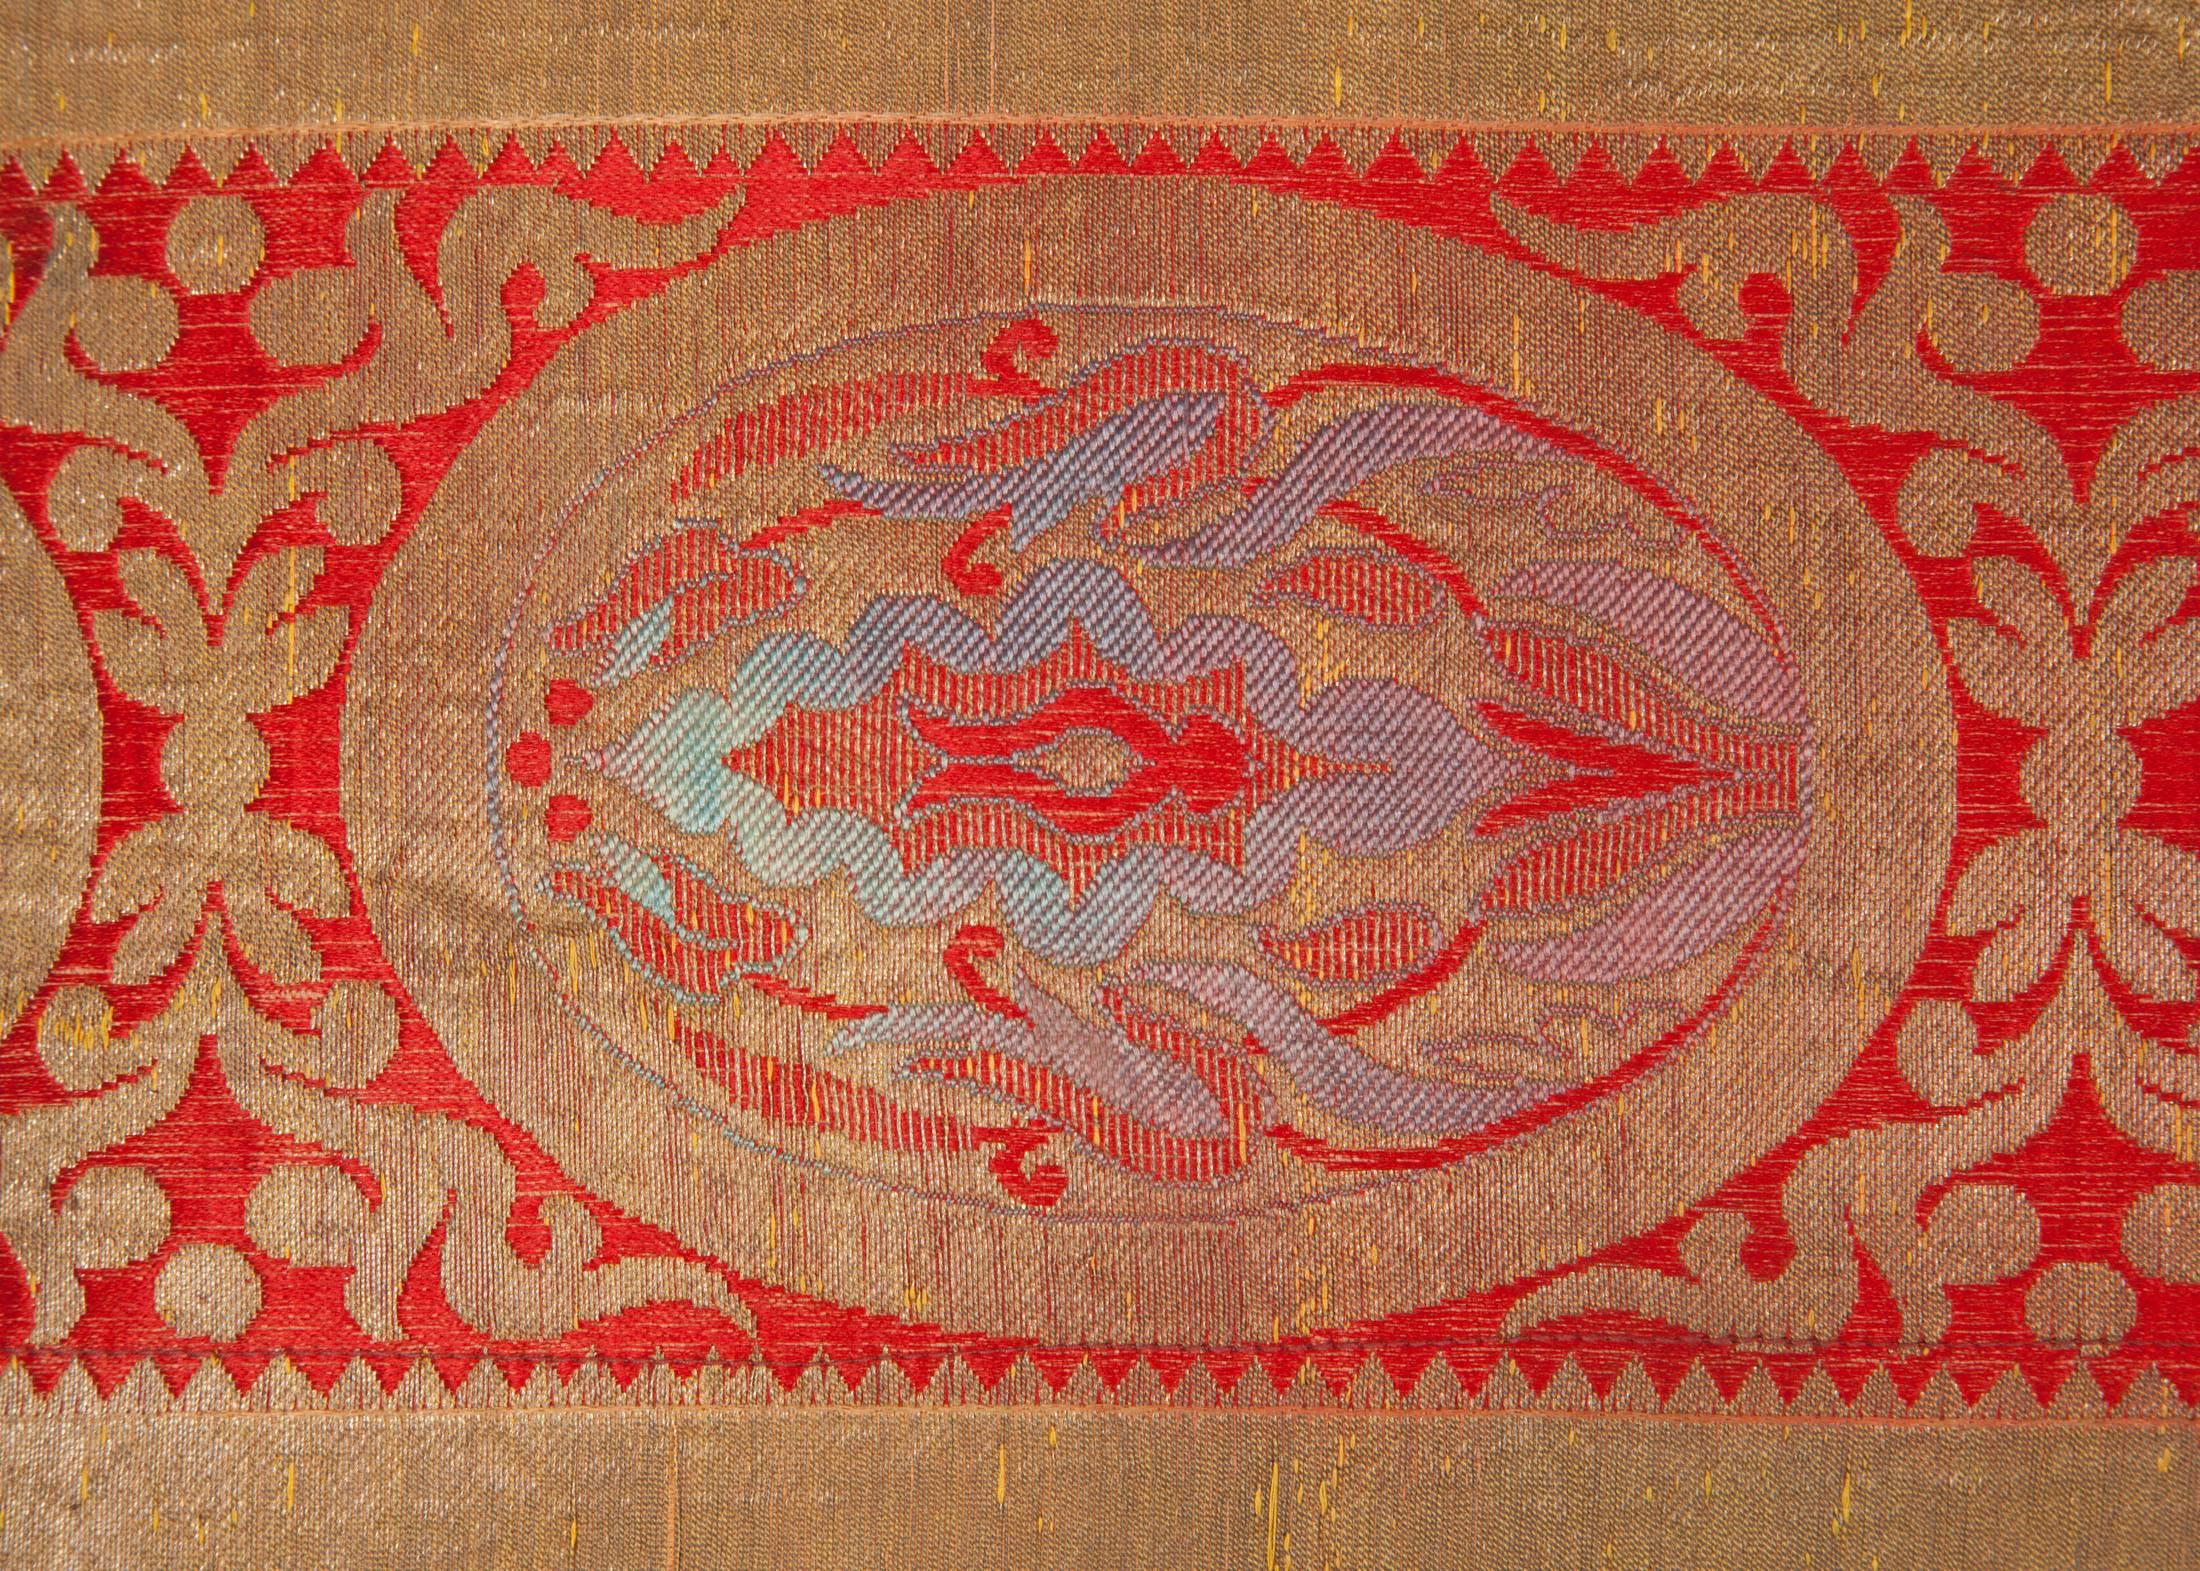 Woven Early 20th Century Central Asian Brocaded Pillow For Sale